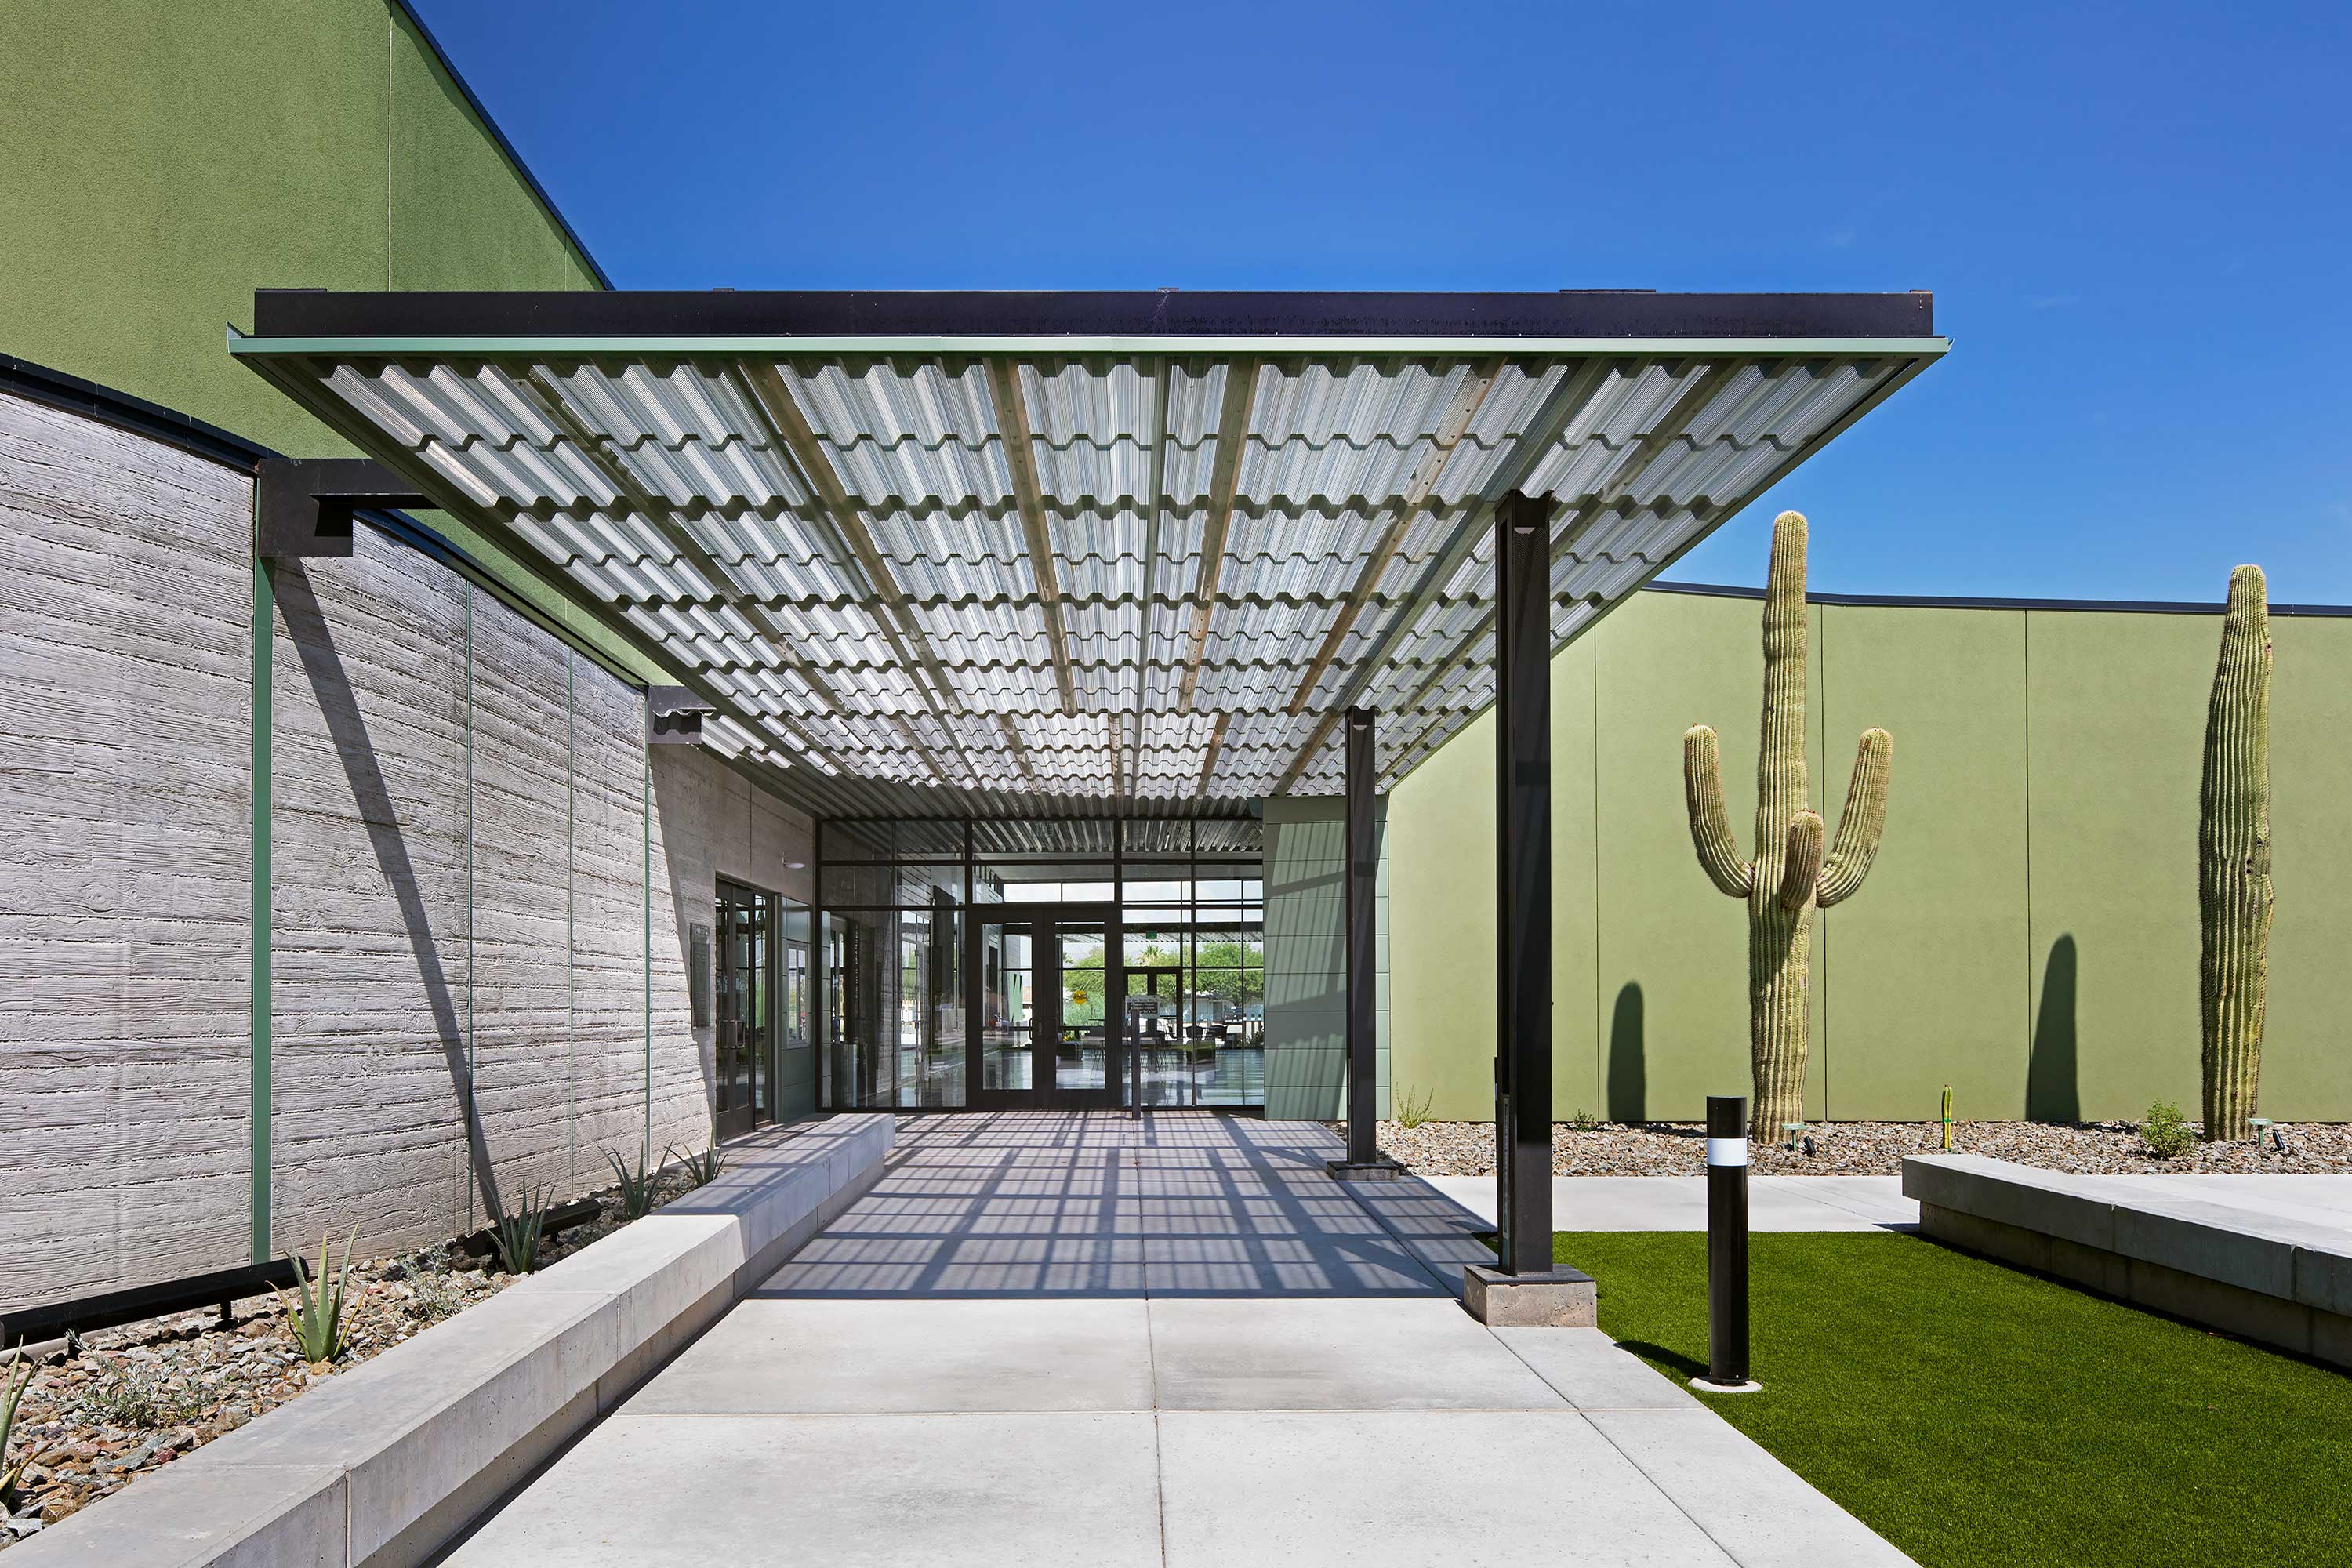 Eloy City Hall - Eloy, Arizona. For PAC-CLAD. Architecture Photography by Alan Blakely. 